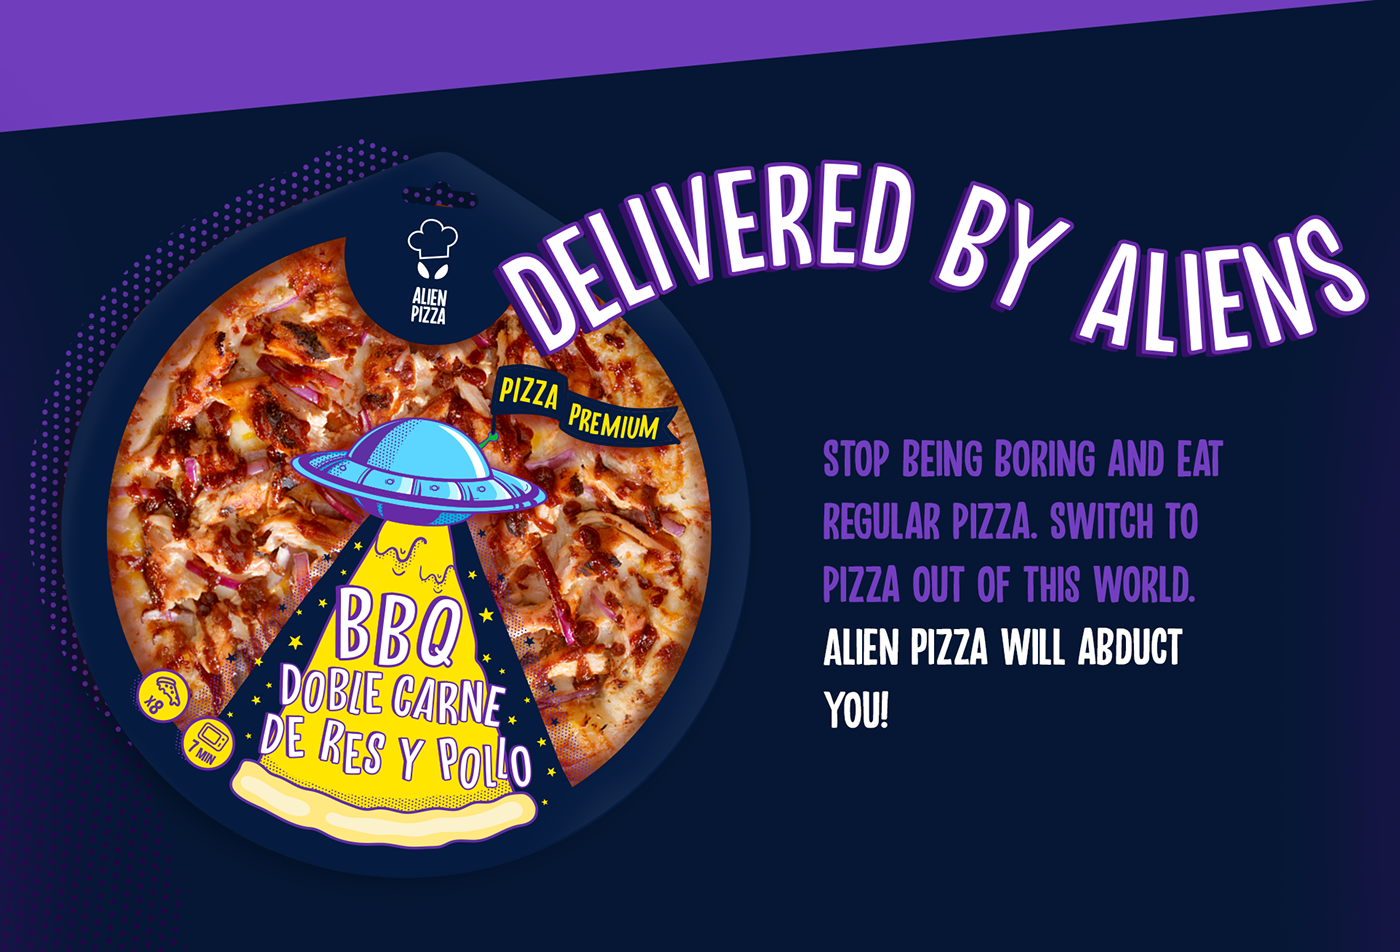 animation  copywriting  design Food  food design ILLUSTRATION  Packaging Pizza ready meal shelf ready